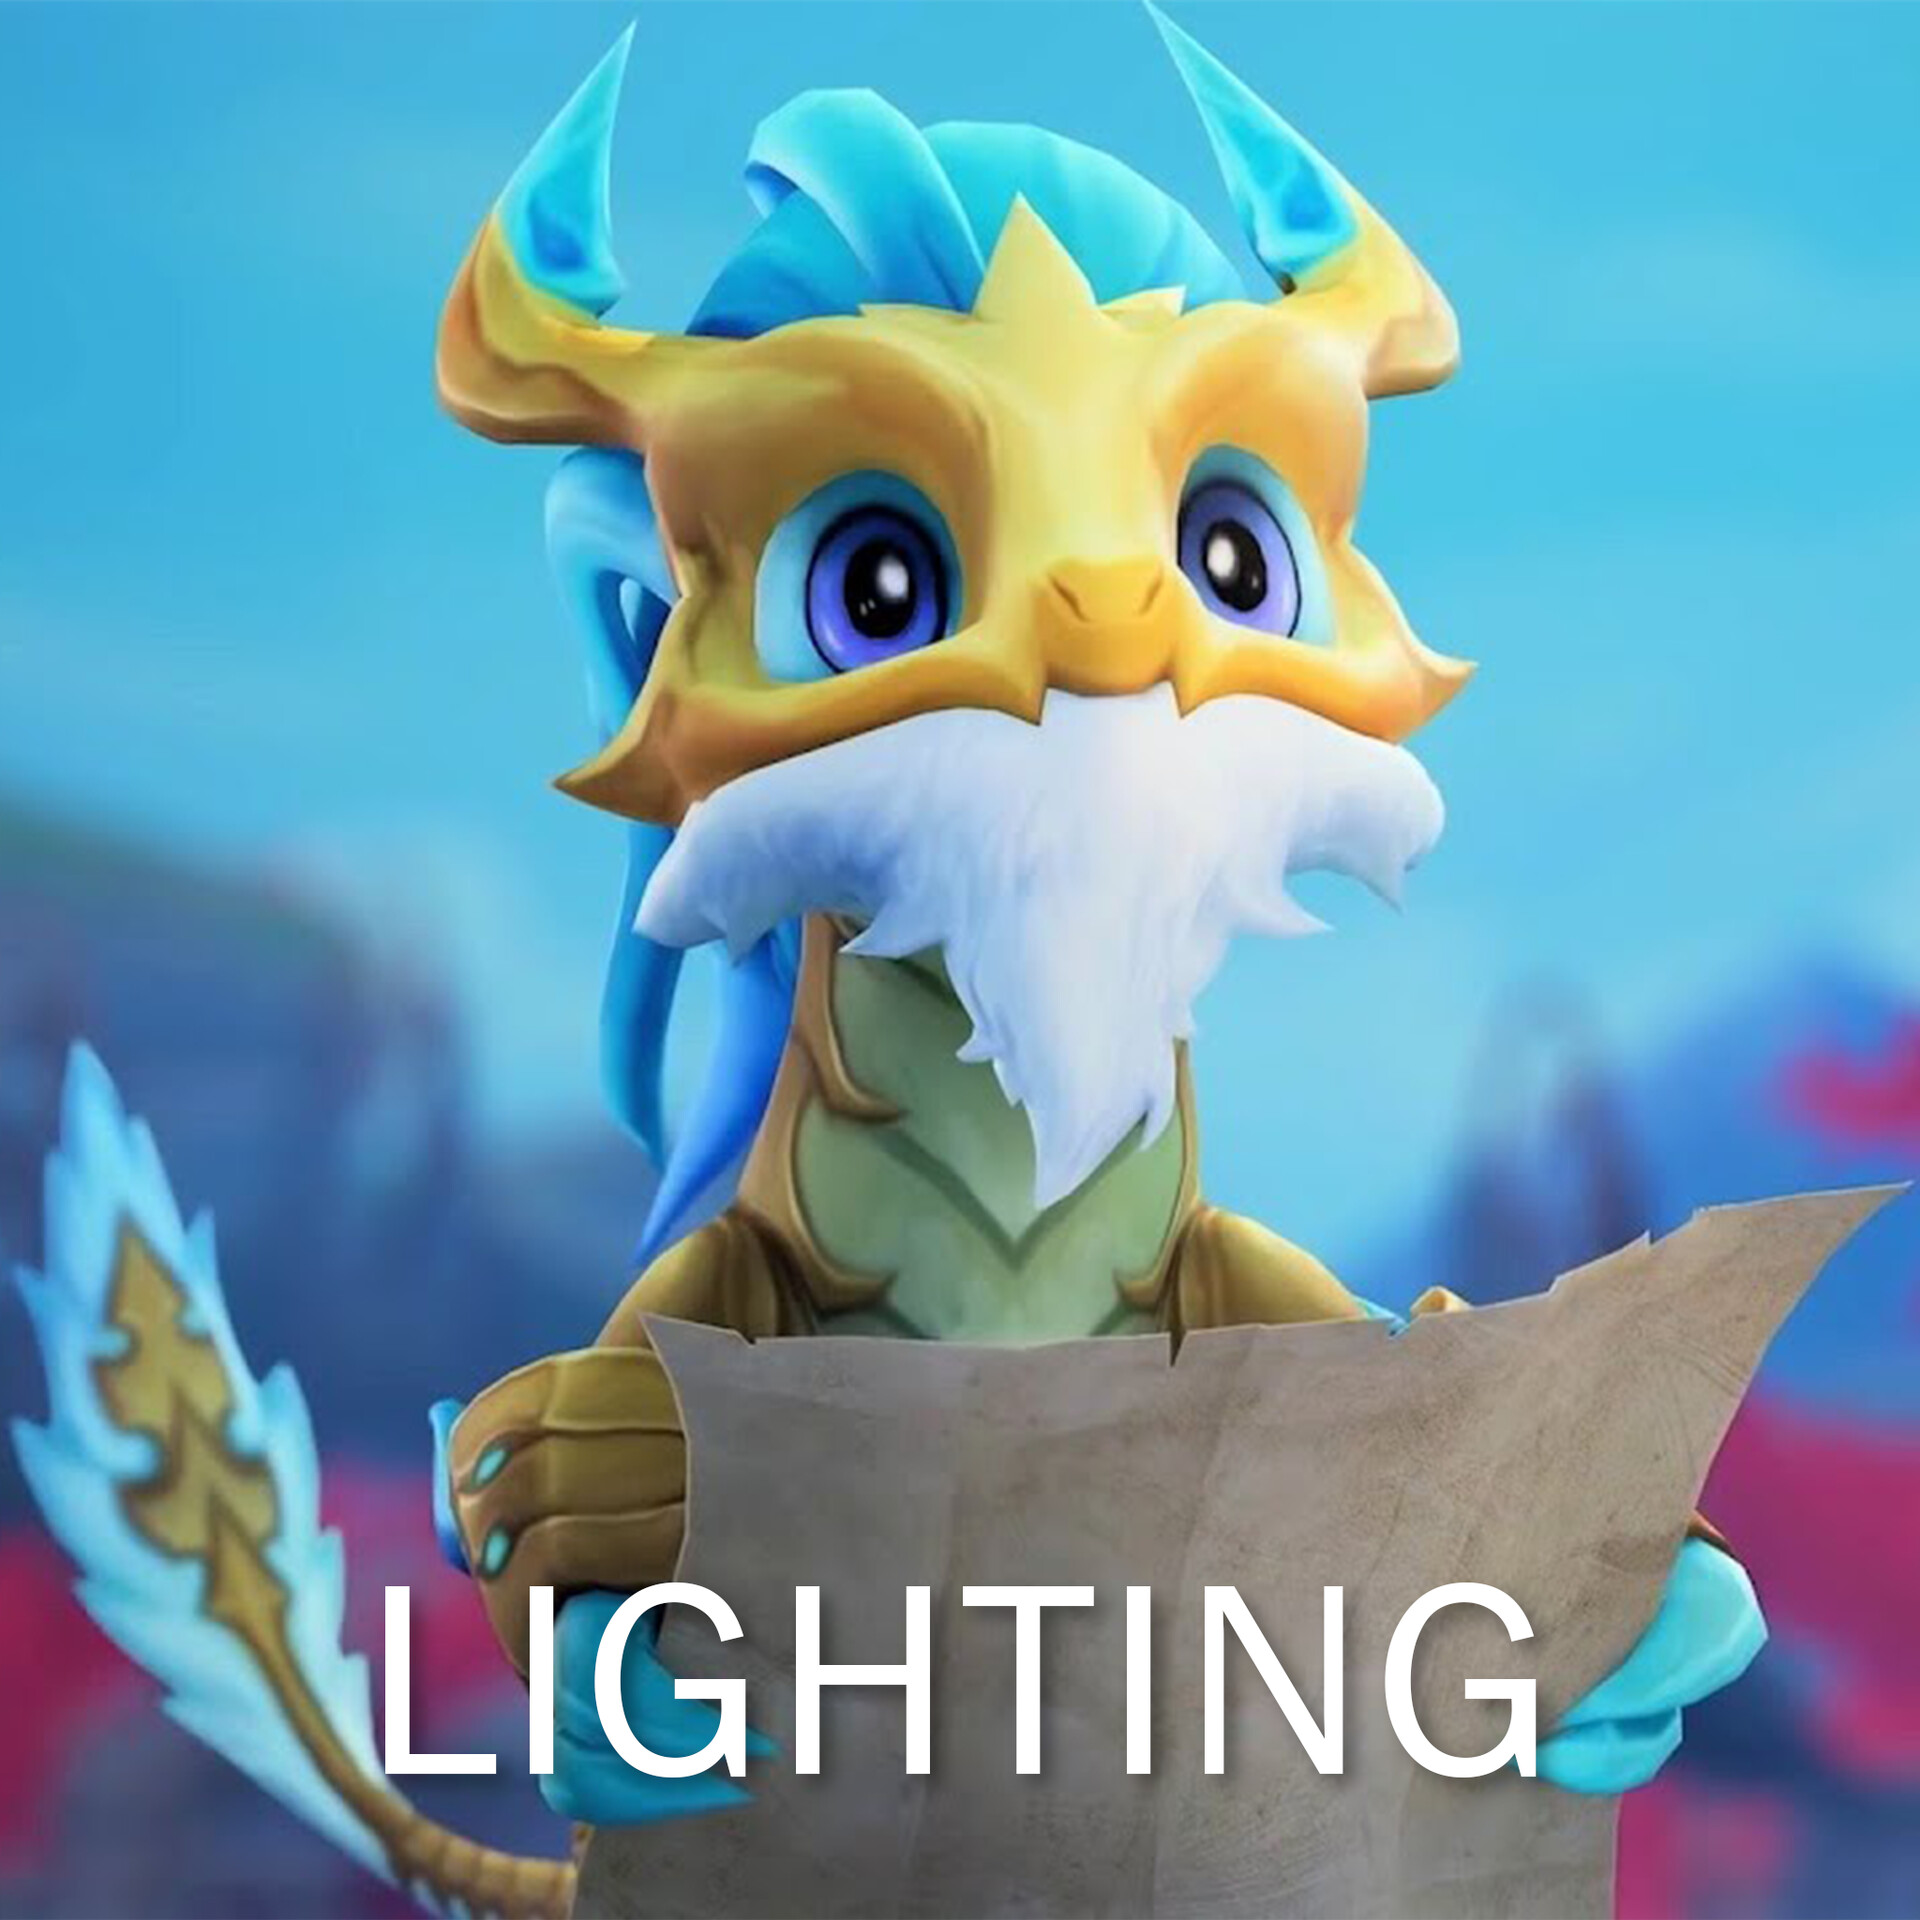 Eevee on X: I did this render of Tier 1 Ao Shin, I really like this little  legends is so cuteeee <3 #Blender #AoShin #Leagueoflegends #TFT  #TeamfightTactics  / X